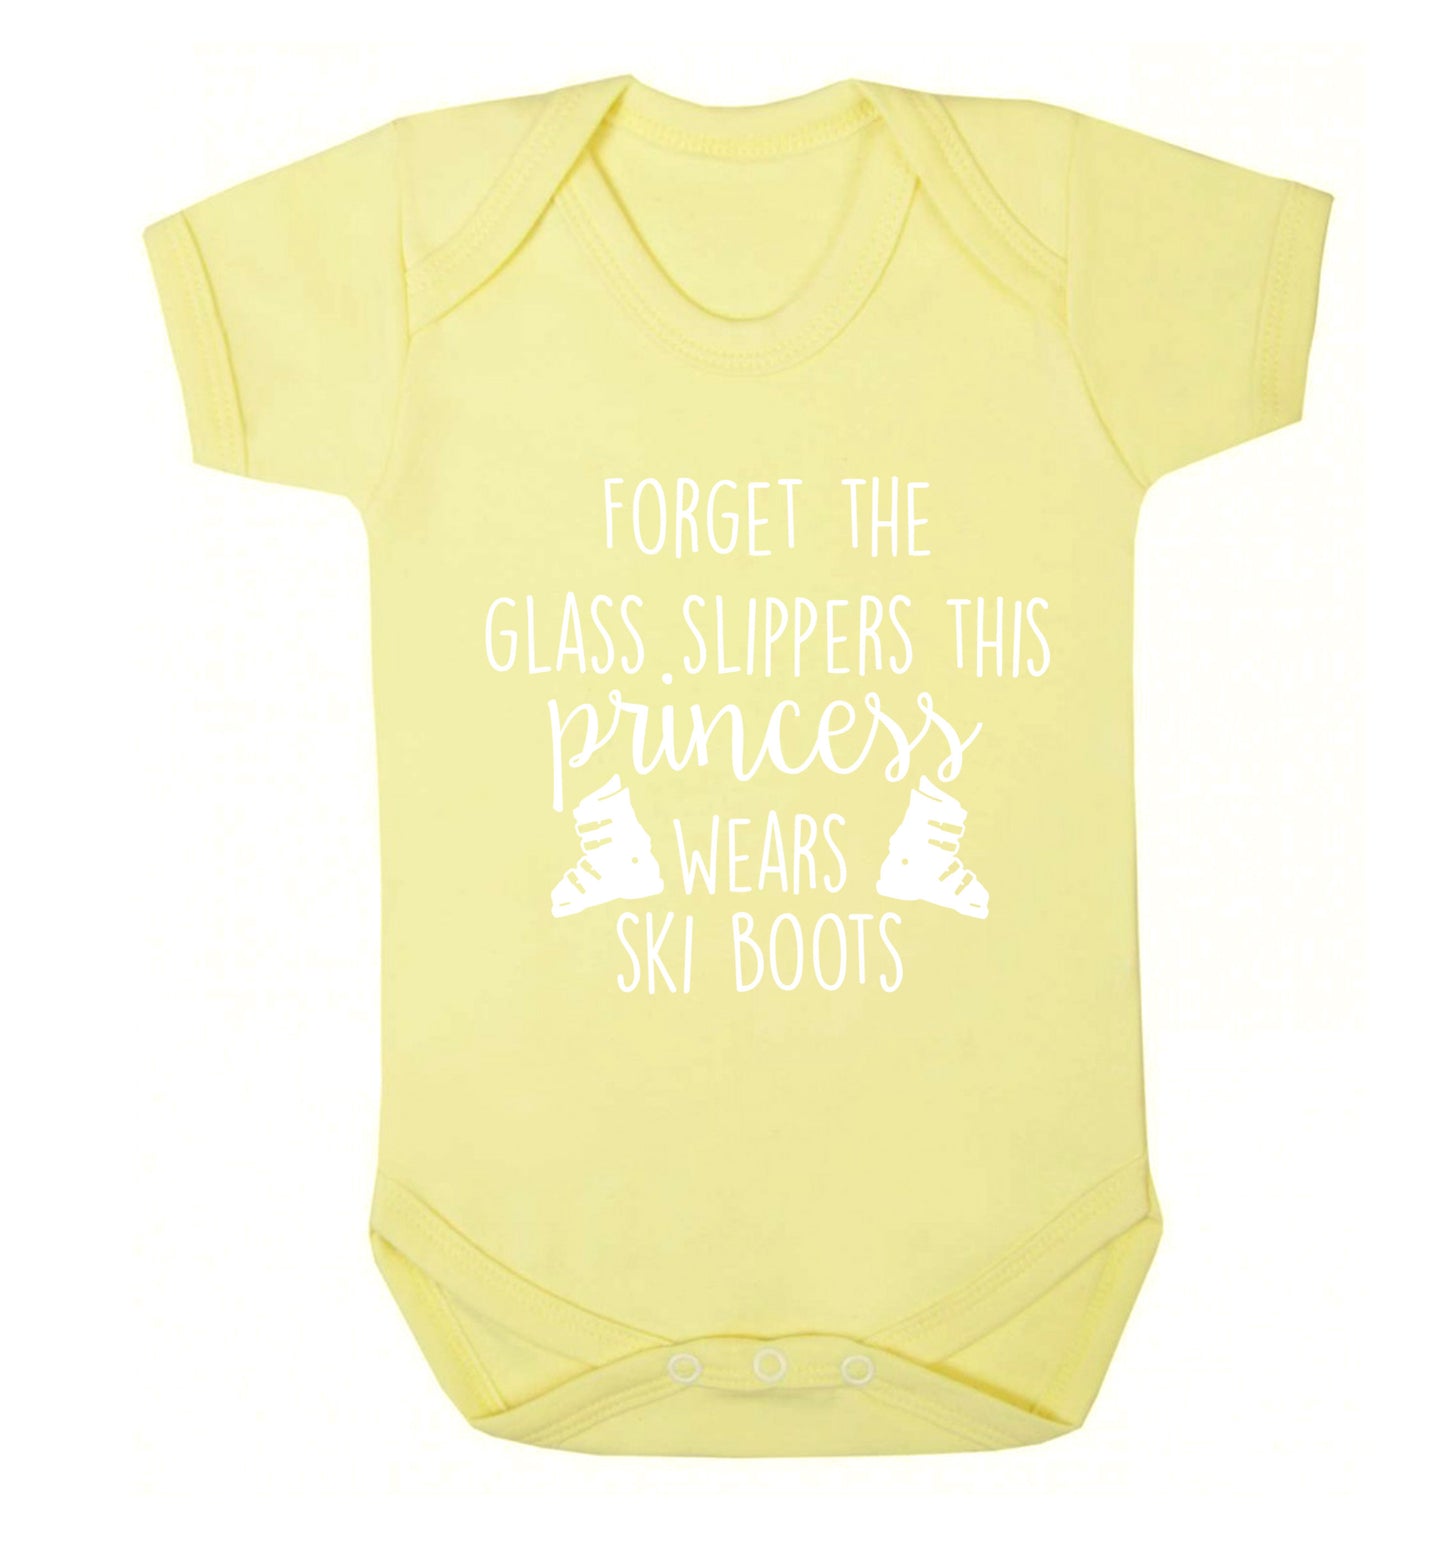 Forget the glass slippers this princess wears ski boots Baby Vest pale yellow 18-24 months